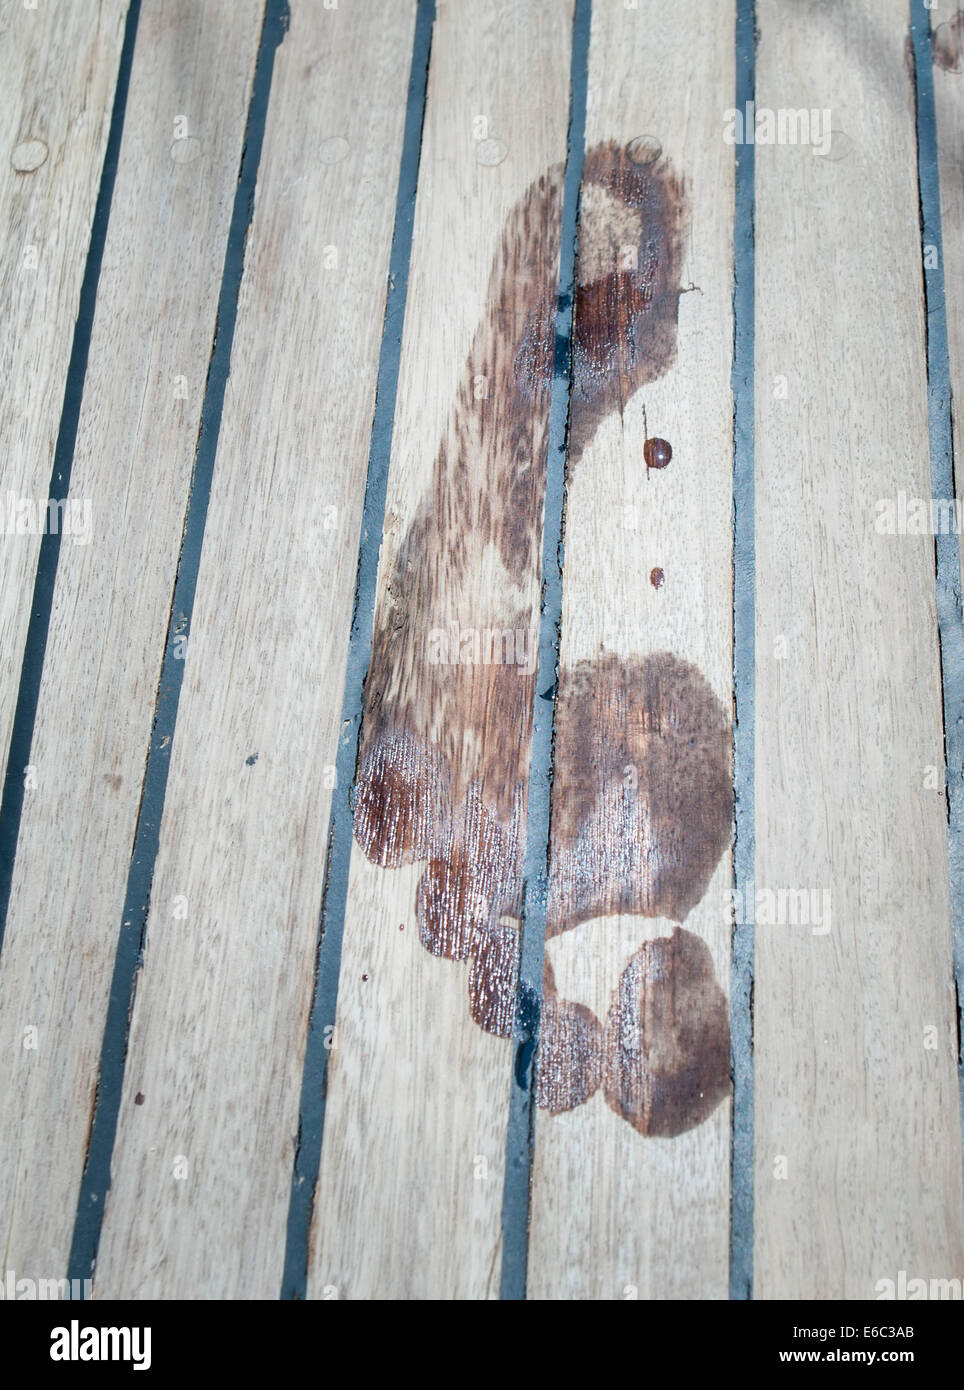 footprint made by a wet bare foot on a teak ships deck Stock Photo